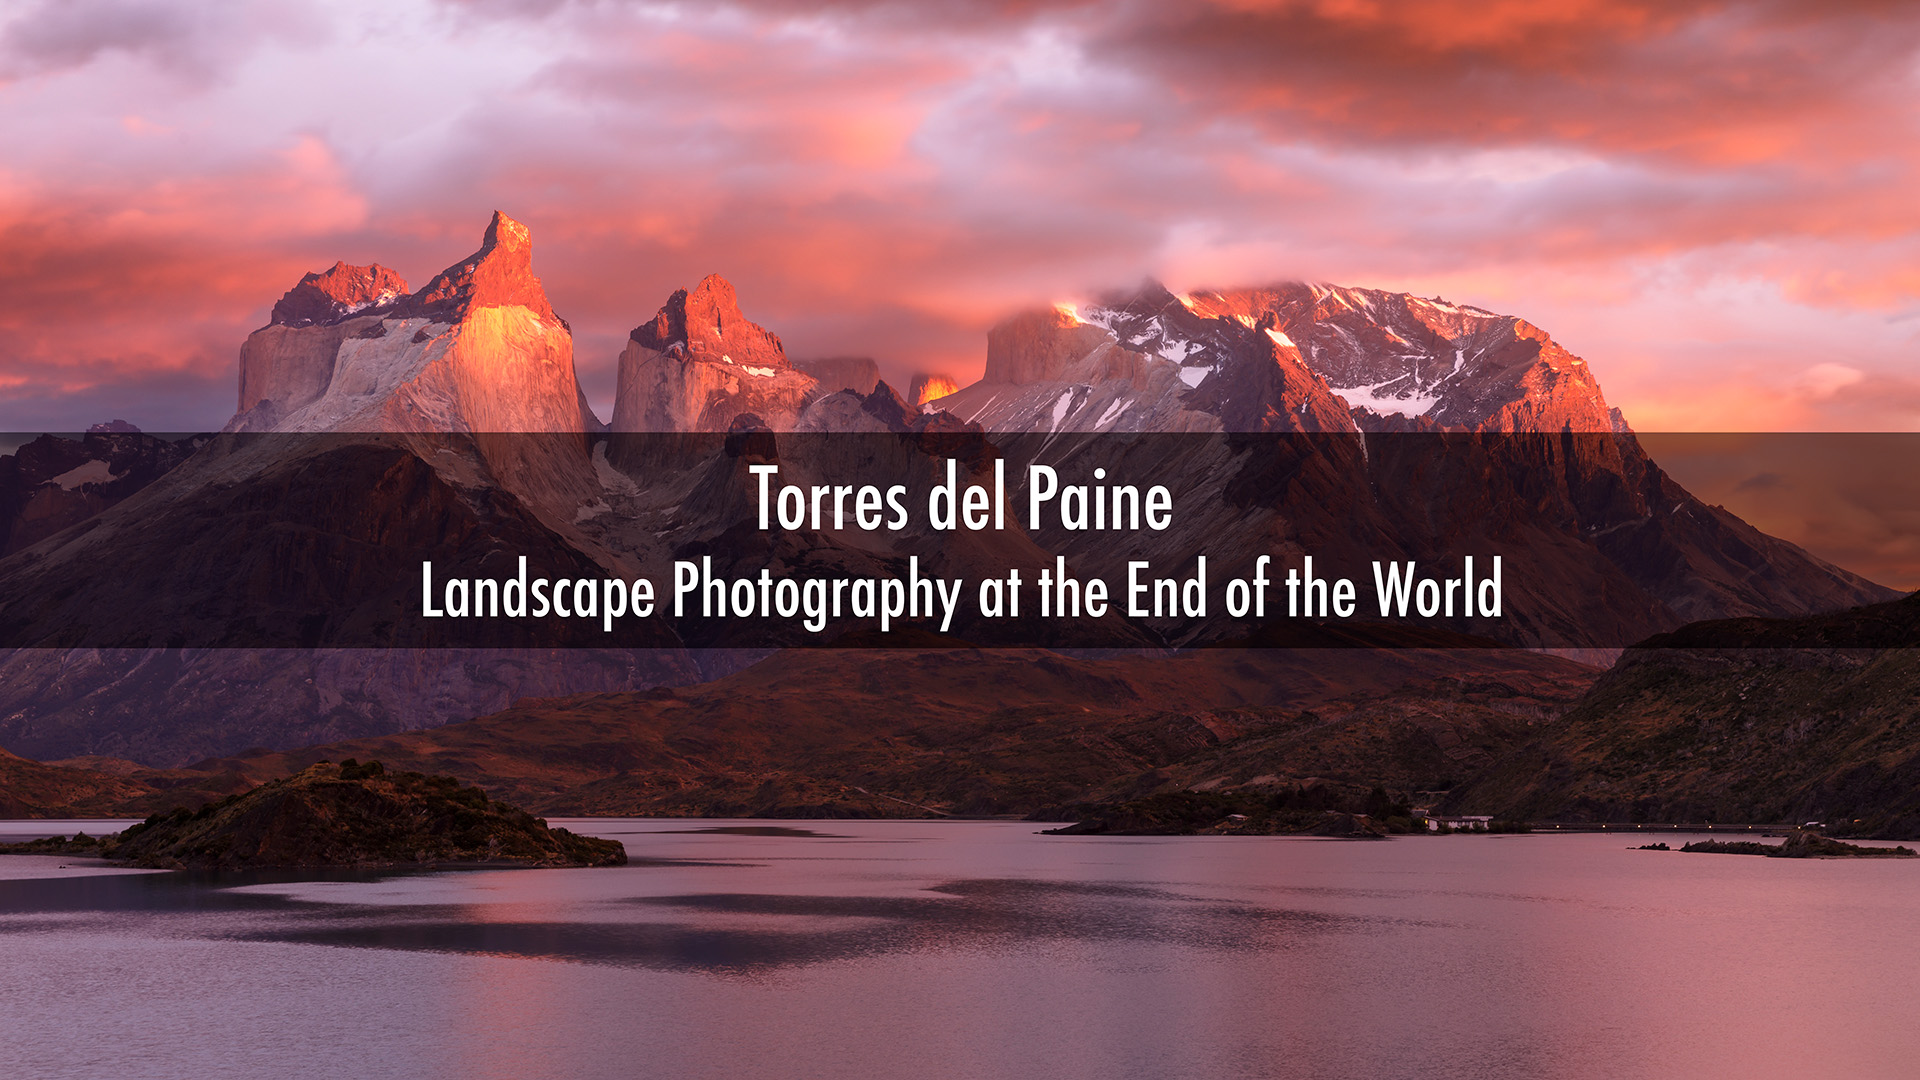 Torres del Paine. Landscape photography at the end of the world. Chile.